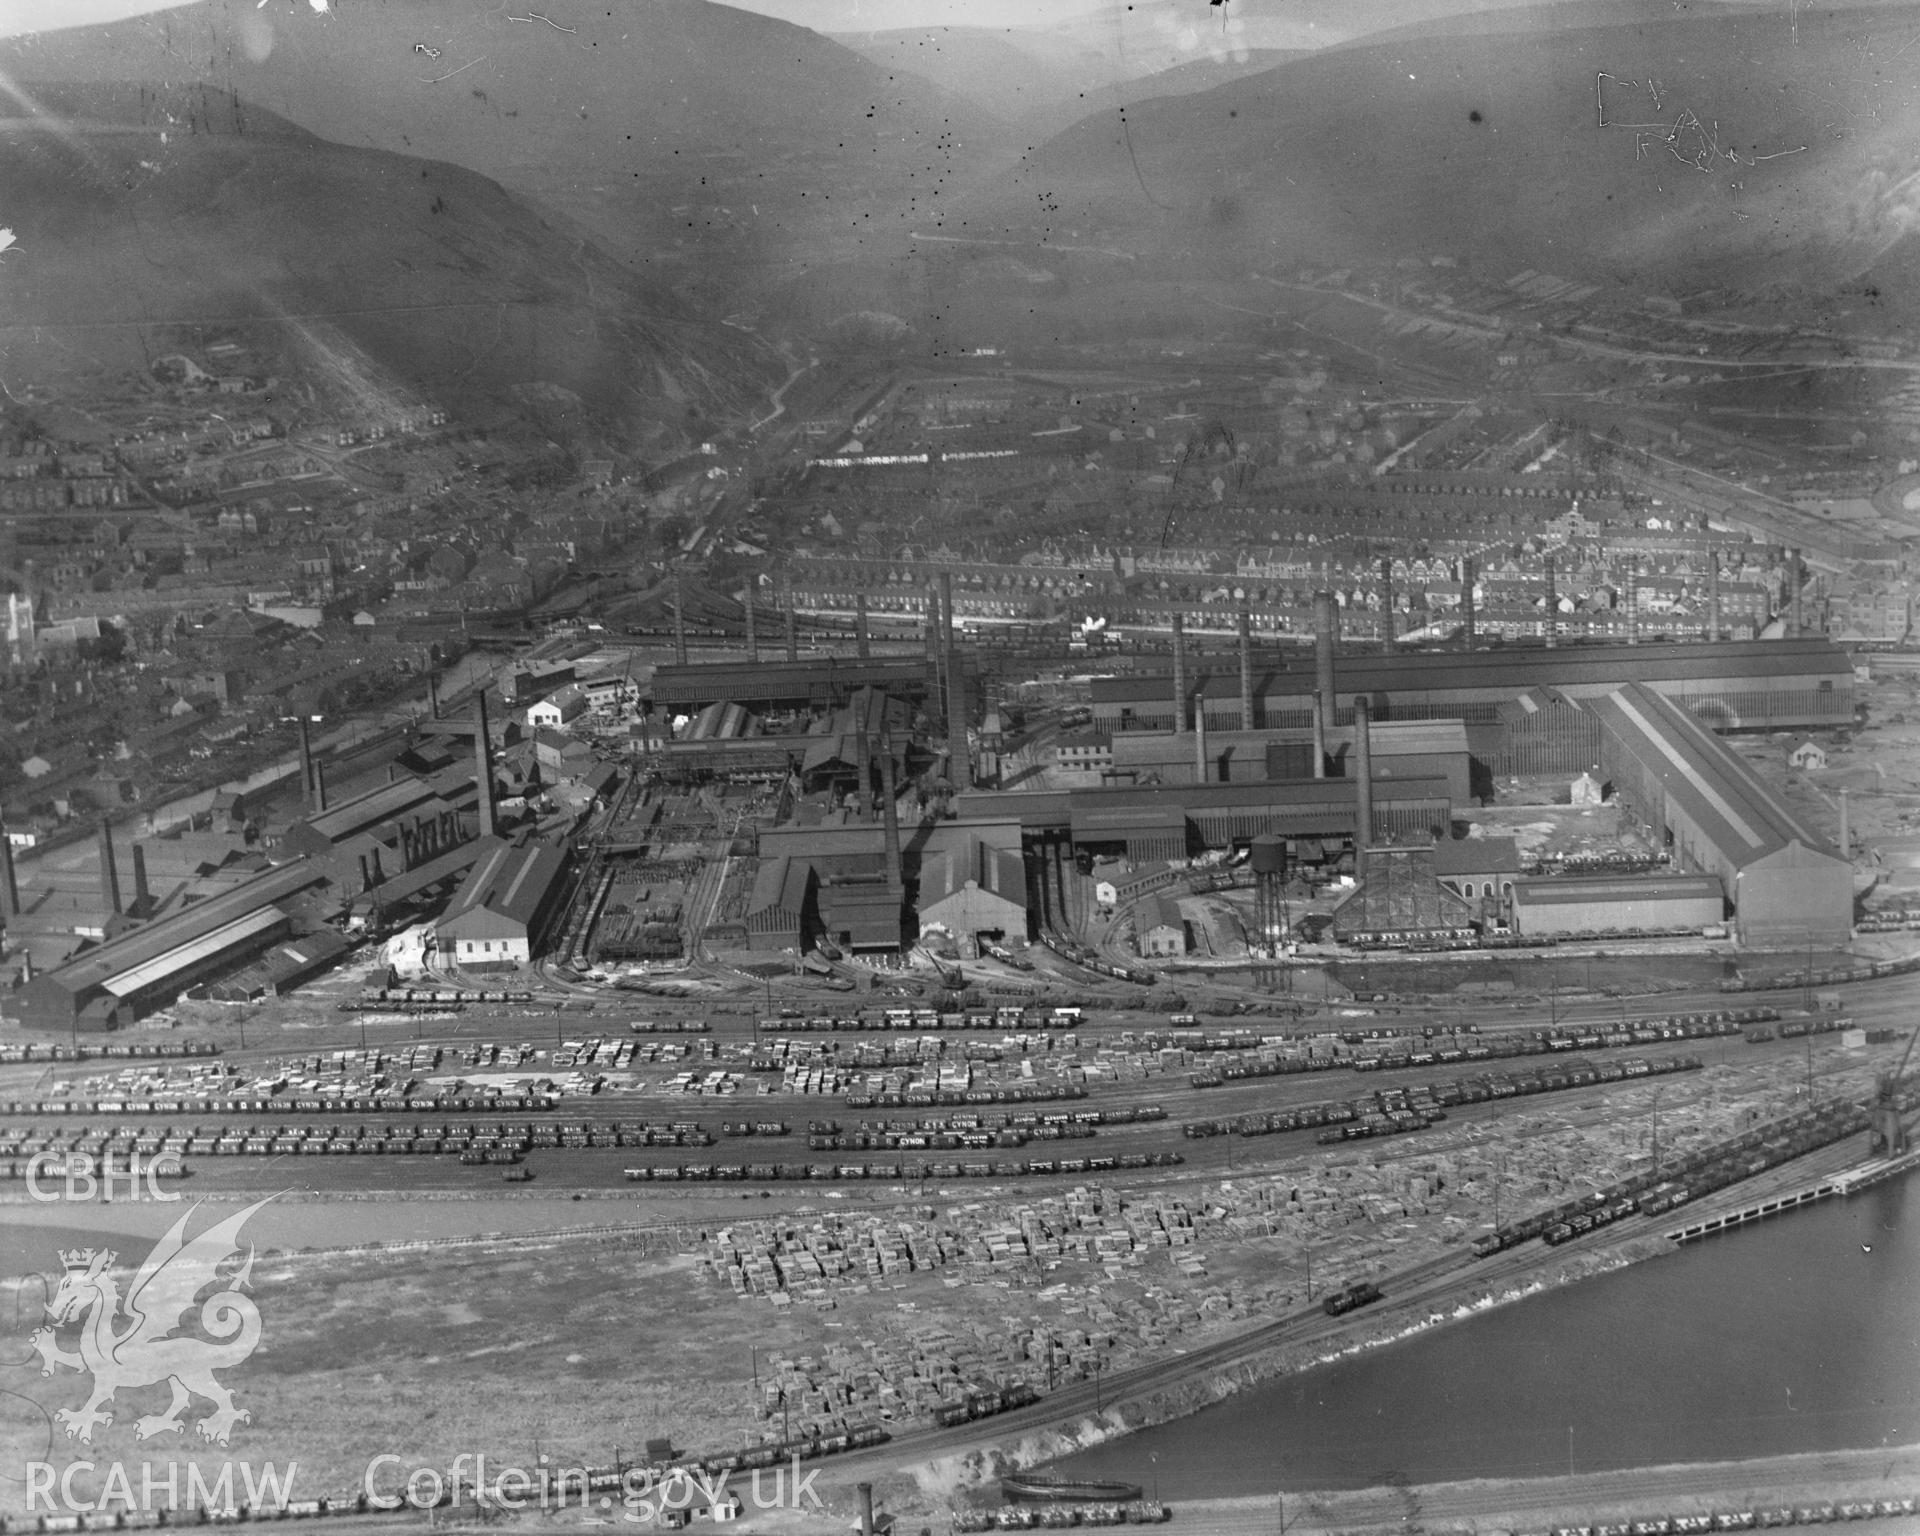 View of Aberavon showing steelworks, oblique aerial view. 5?x4? black and white glass plate negative.